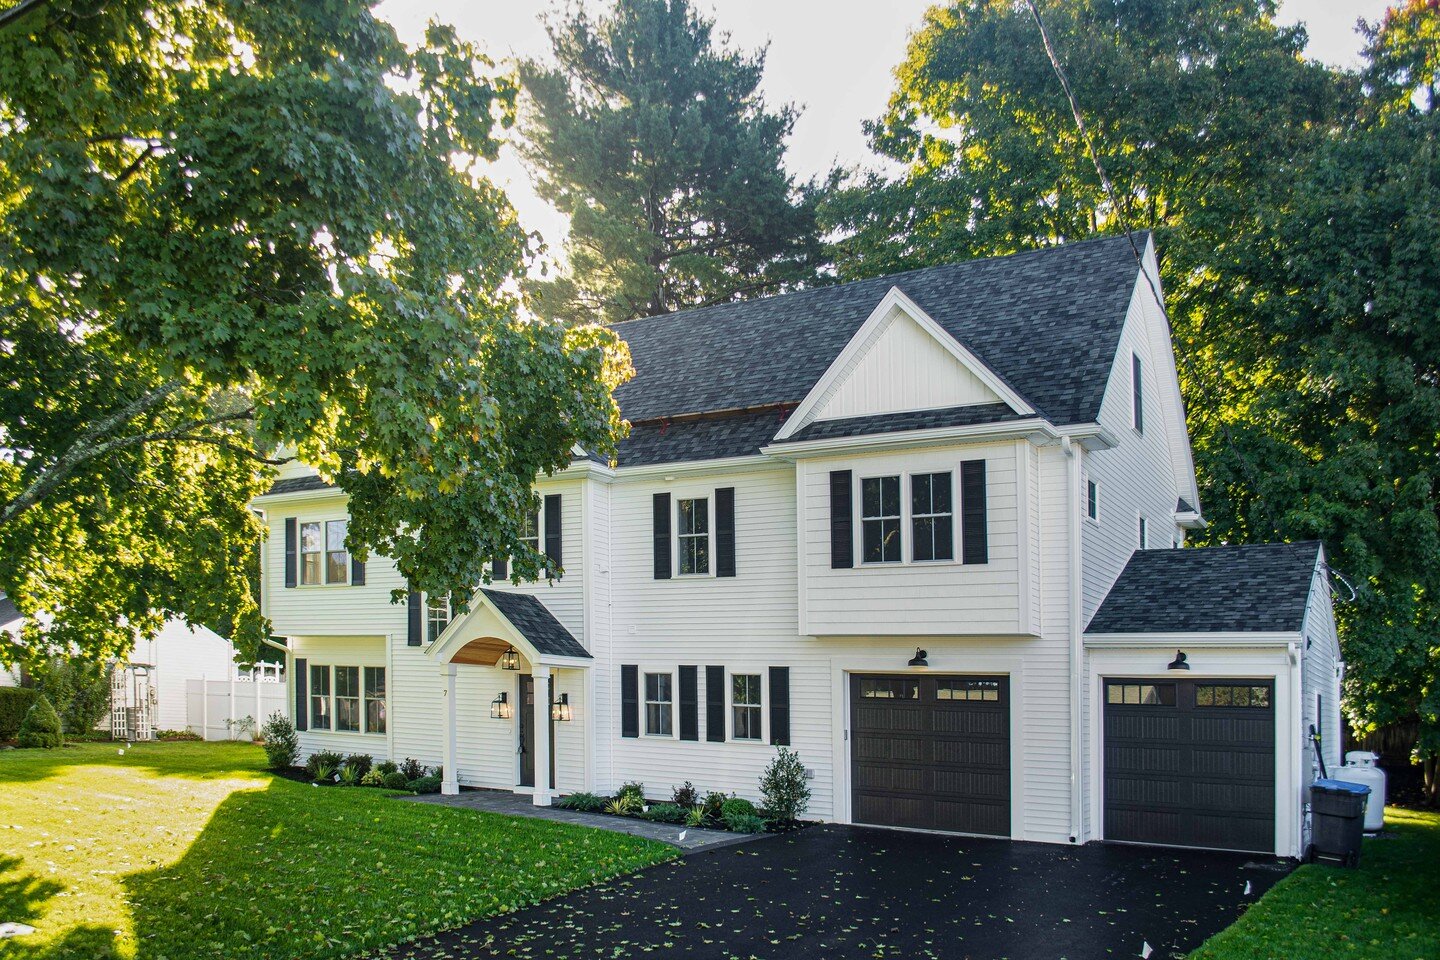 Miss out on 7 Stanley and 14 Wentworth? Check out the current project just listed at 7 Hemlock Drive! Estimated to be complete in a couple of months!

4 Beds, 4.5 Baths, 3876 sqft., 2 Car Garage //

#natick #natickma #forsale #renovation #renovatedho